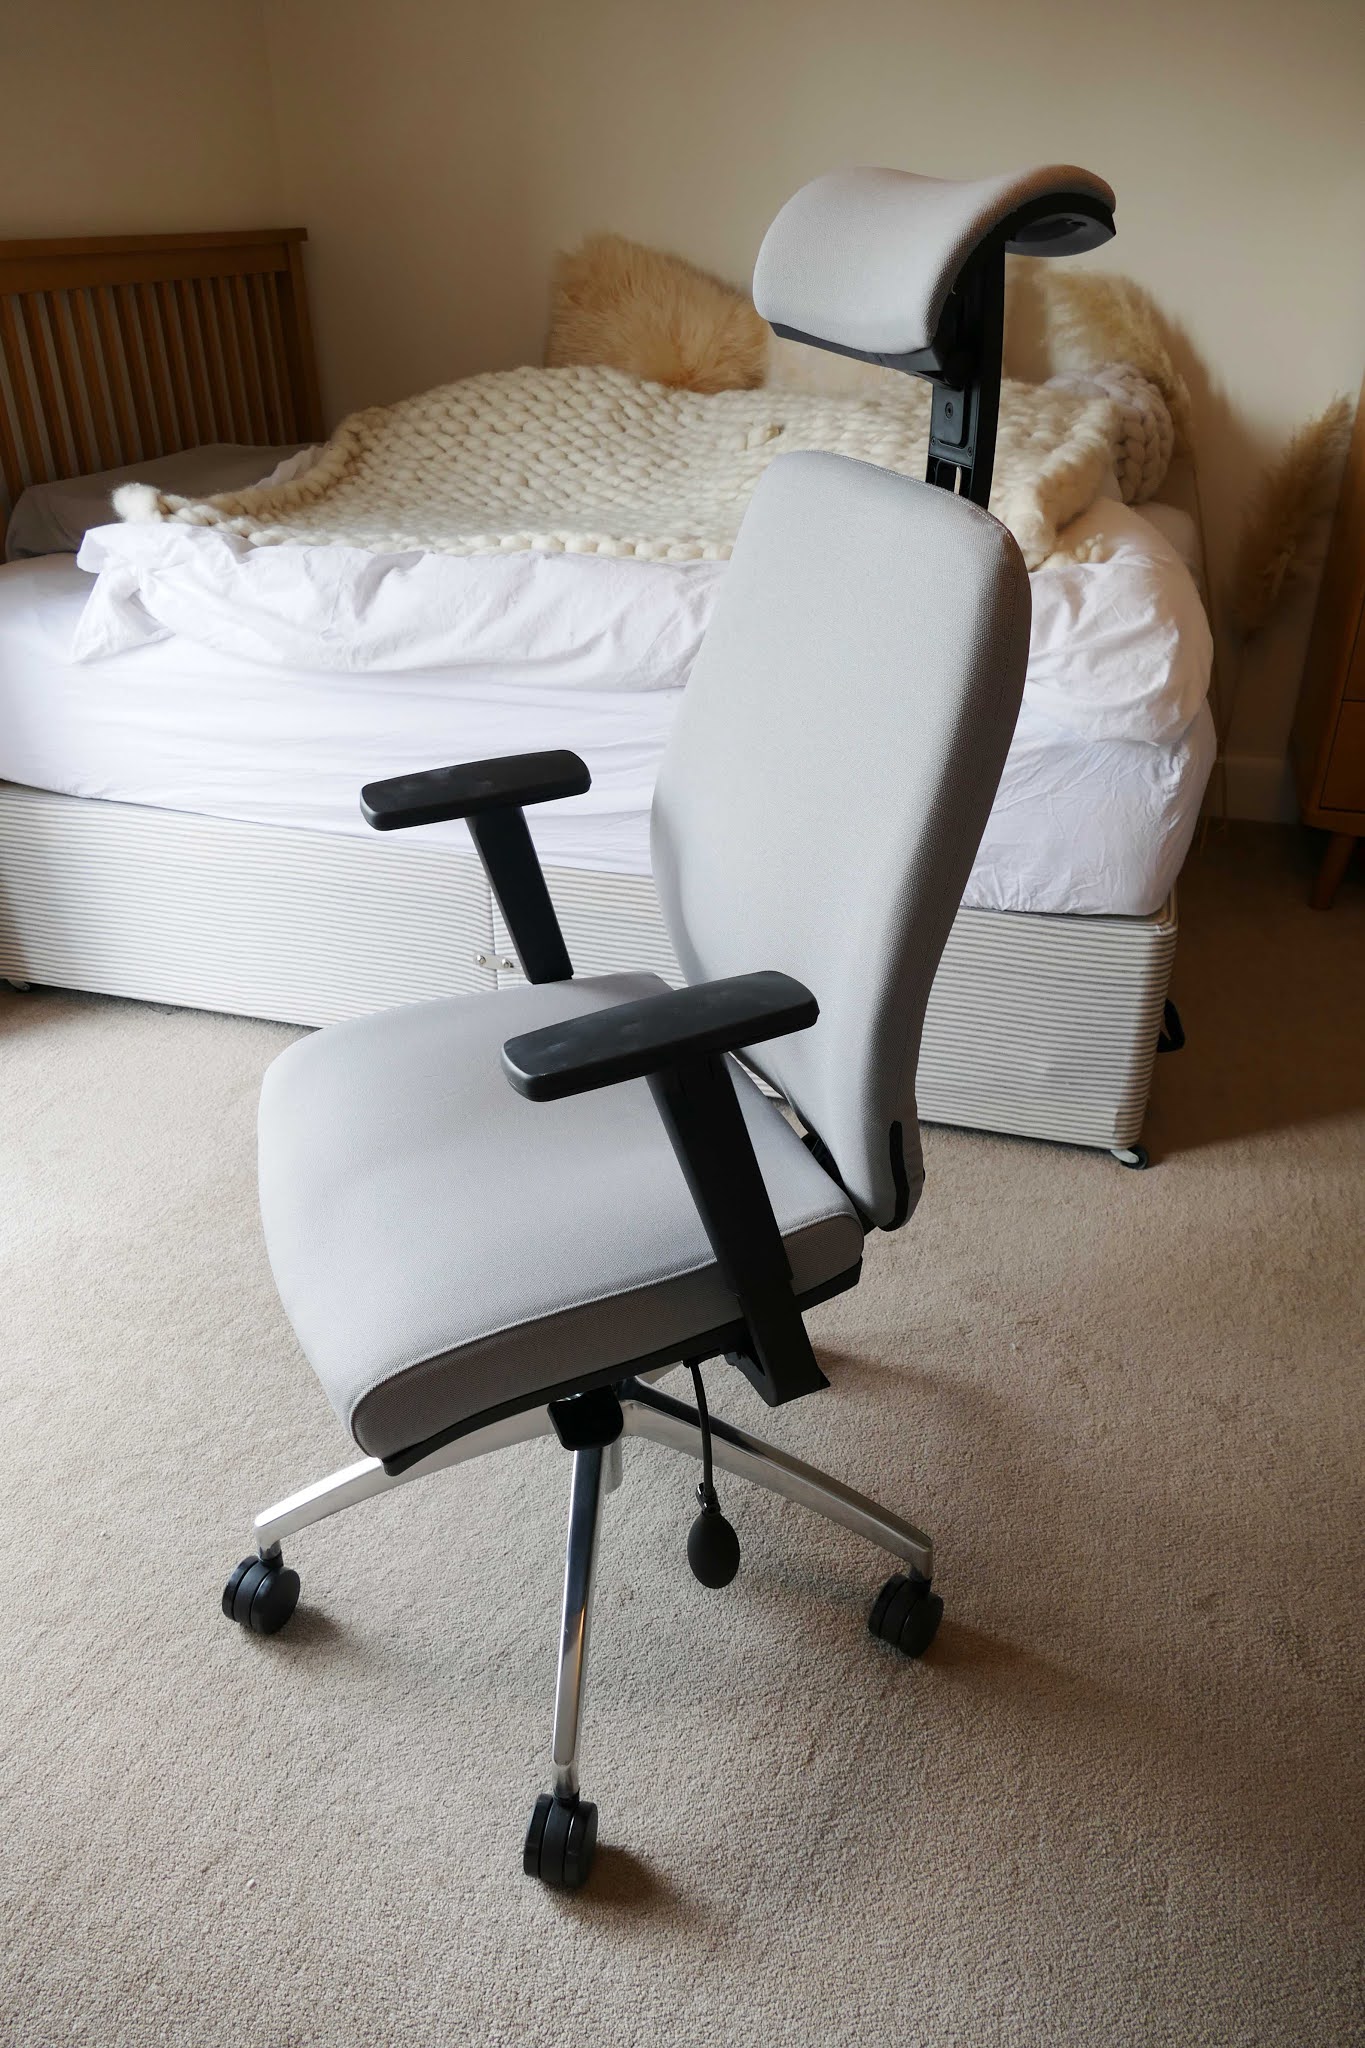 My Gorgeous New Chair From Summit At Home - An Honest Review